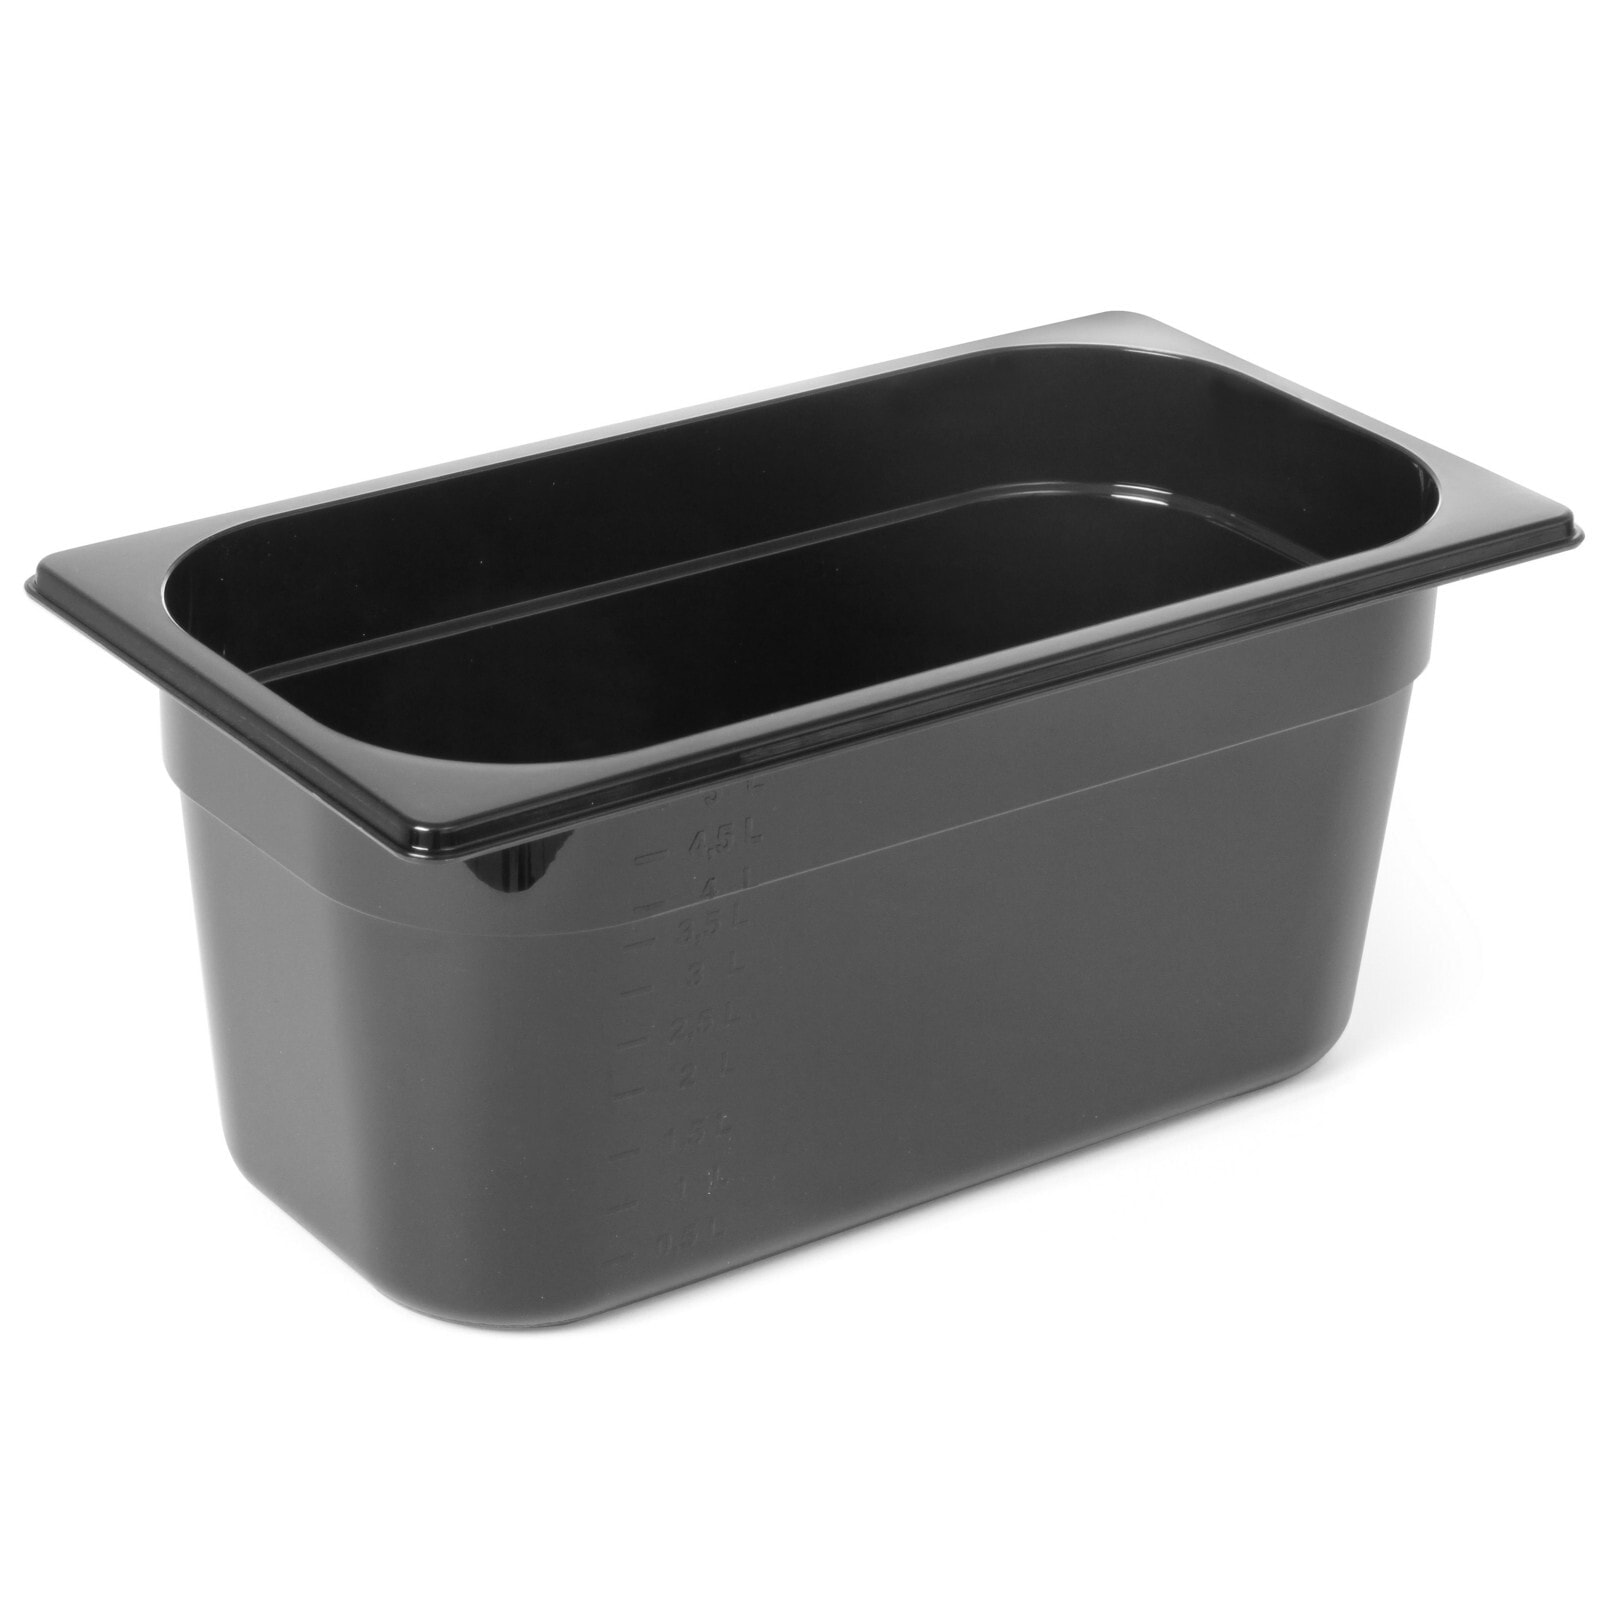 Black polycarbonate container GN 1/3, height 100 mm - Hendi 862520